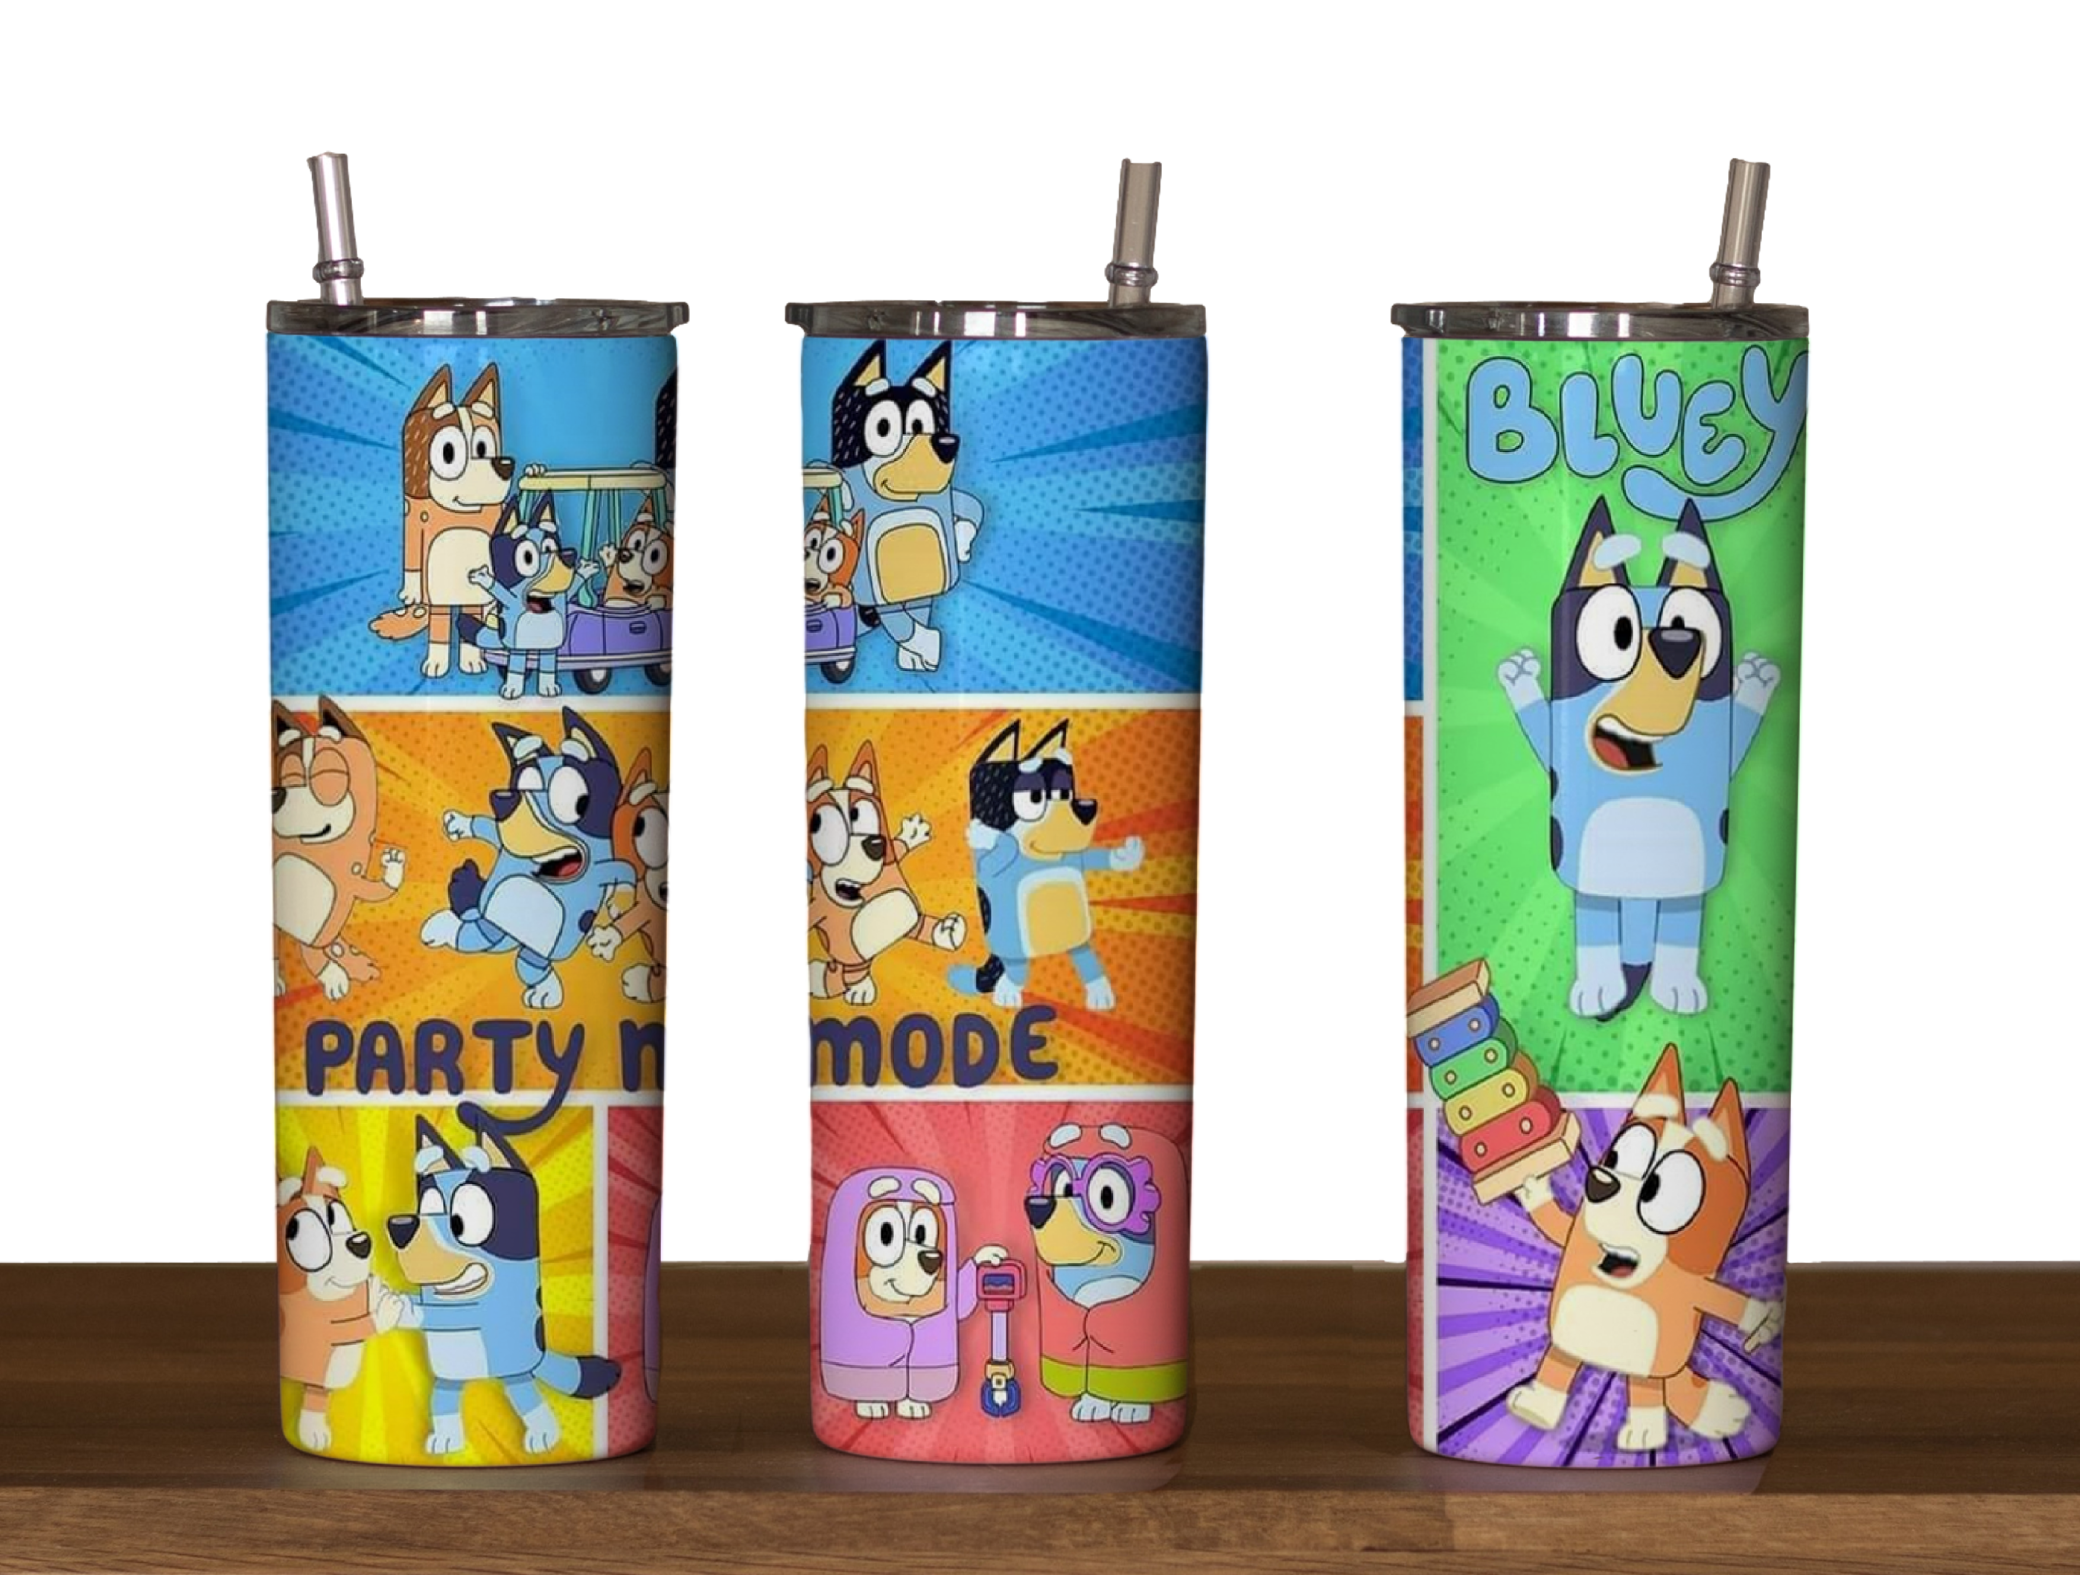 Bluey Tumbler Cup, Bluey Cup Ideas, Tumbler for Kids, Bluey Personalized  Tumbler, Bluey Gifts, Bluey Birthday 